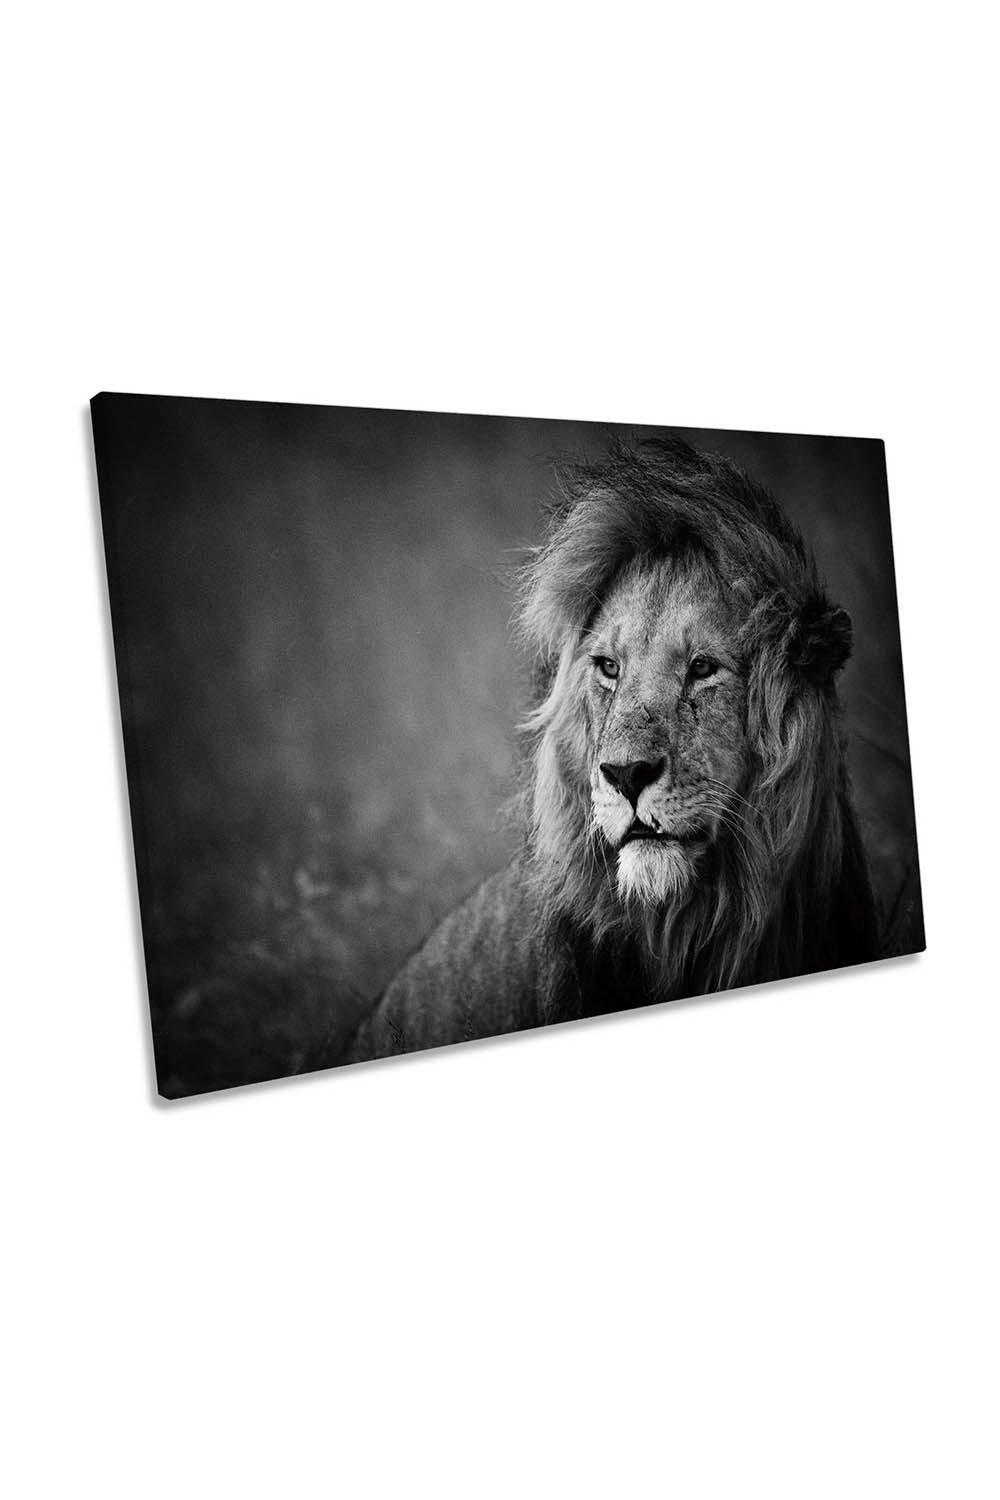 Regal Lion Wildlife Animal Canvas Wall Art Picture Print